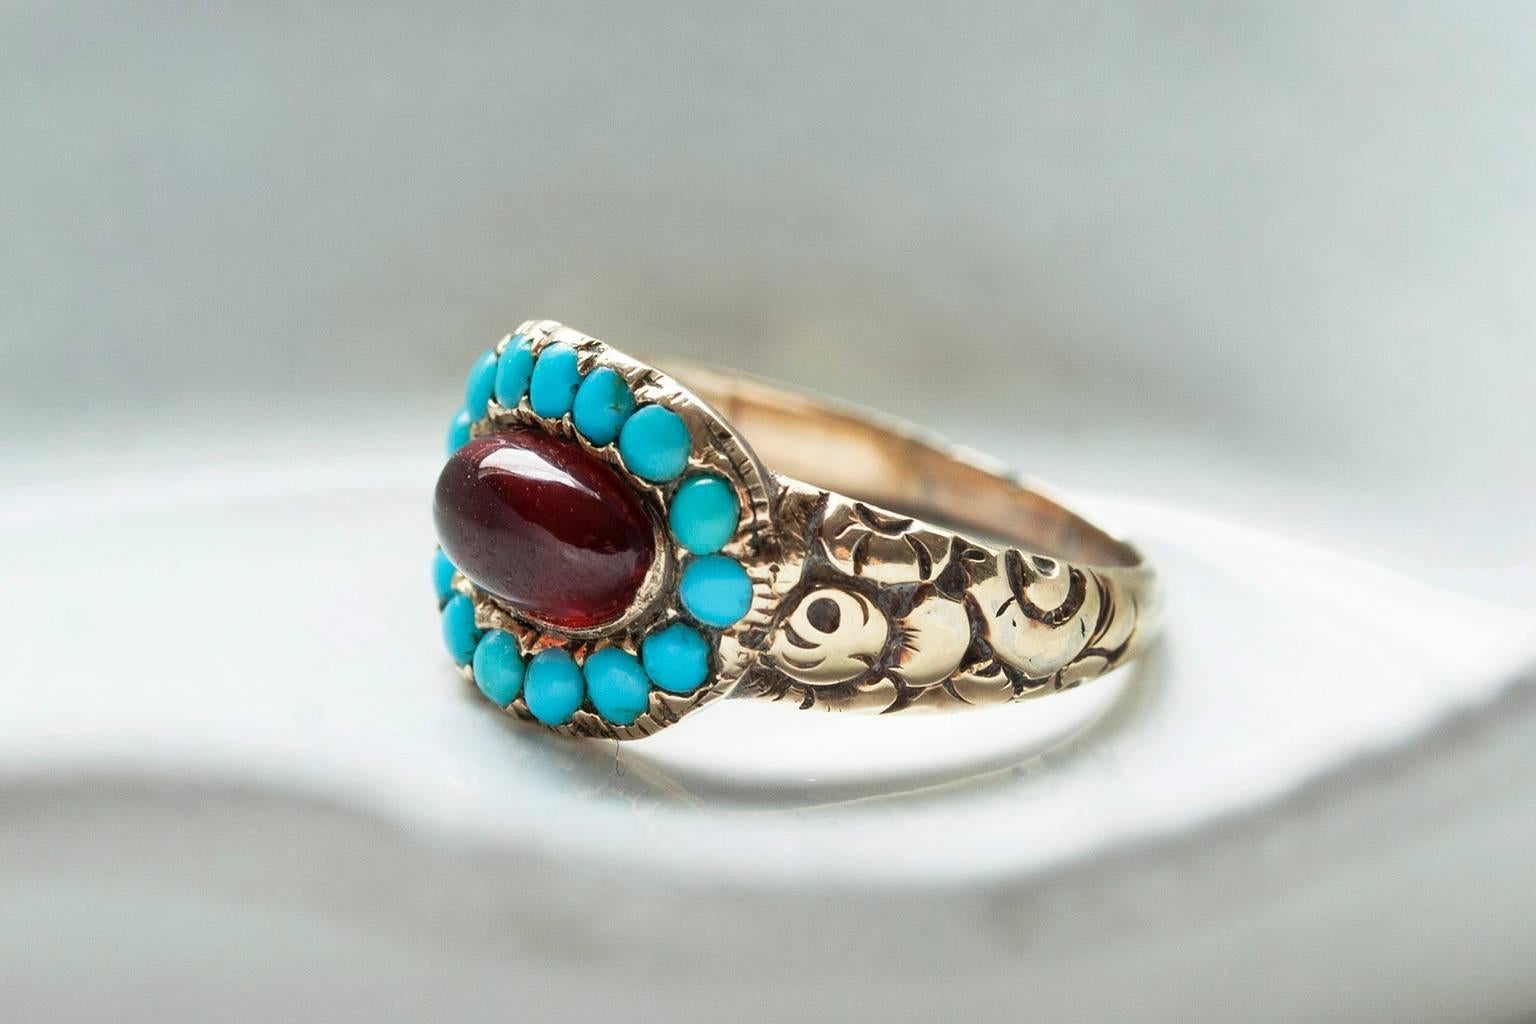 A Georgian turquoise and cabochon garnet ring. Originally the center locket of the ring had had woven hair, but a beautifully cut cabochon garnet has replaced it. The gold shank has decorative chased flowers, and the ring is 14k yellow gold. 

US